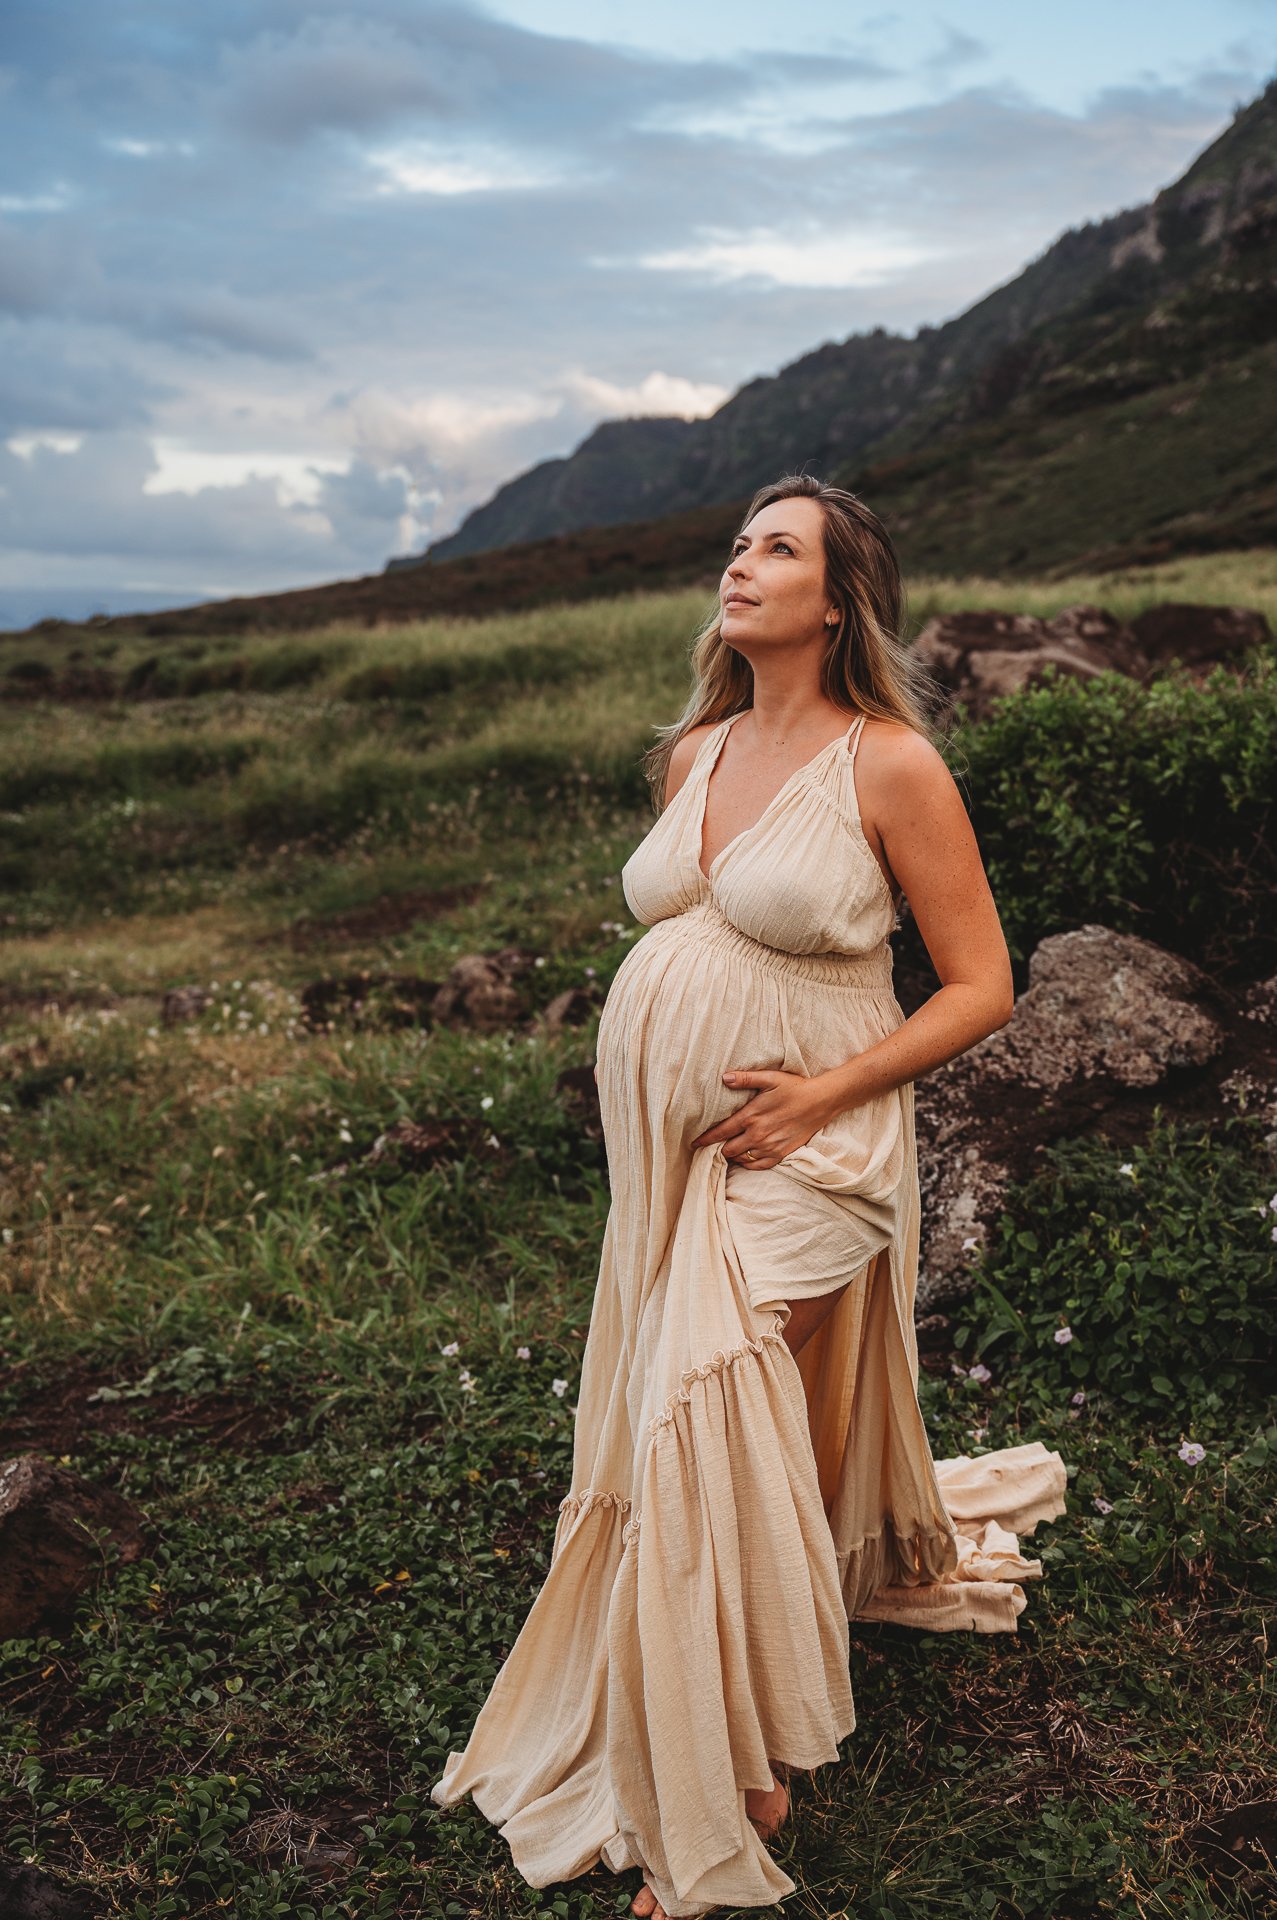 Kaena-Point-North-Shore-Oahu-Hawaii-Maternity-Session-Flower-Crown-Gown-Sarah-Elizabeth-Photos-and-film-maternity--14.jpg